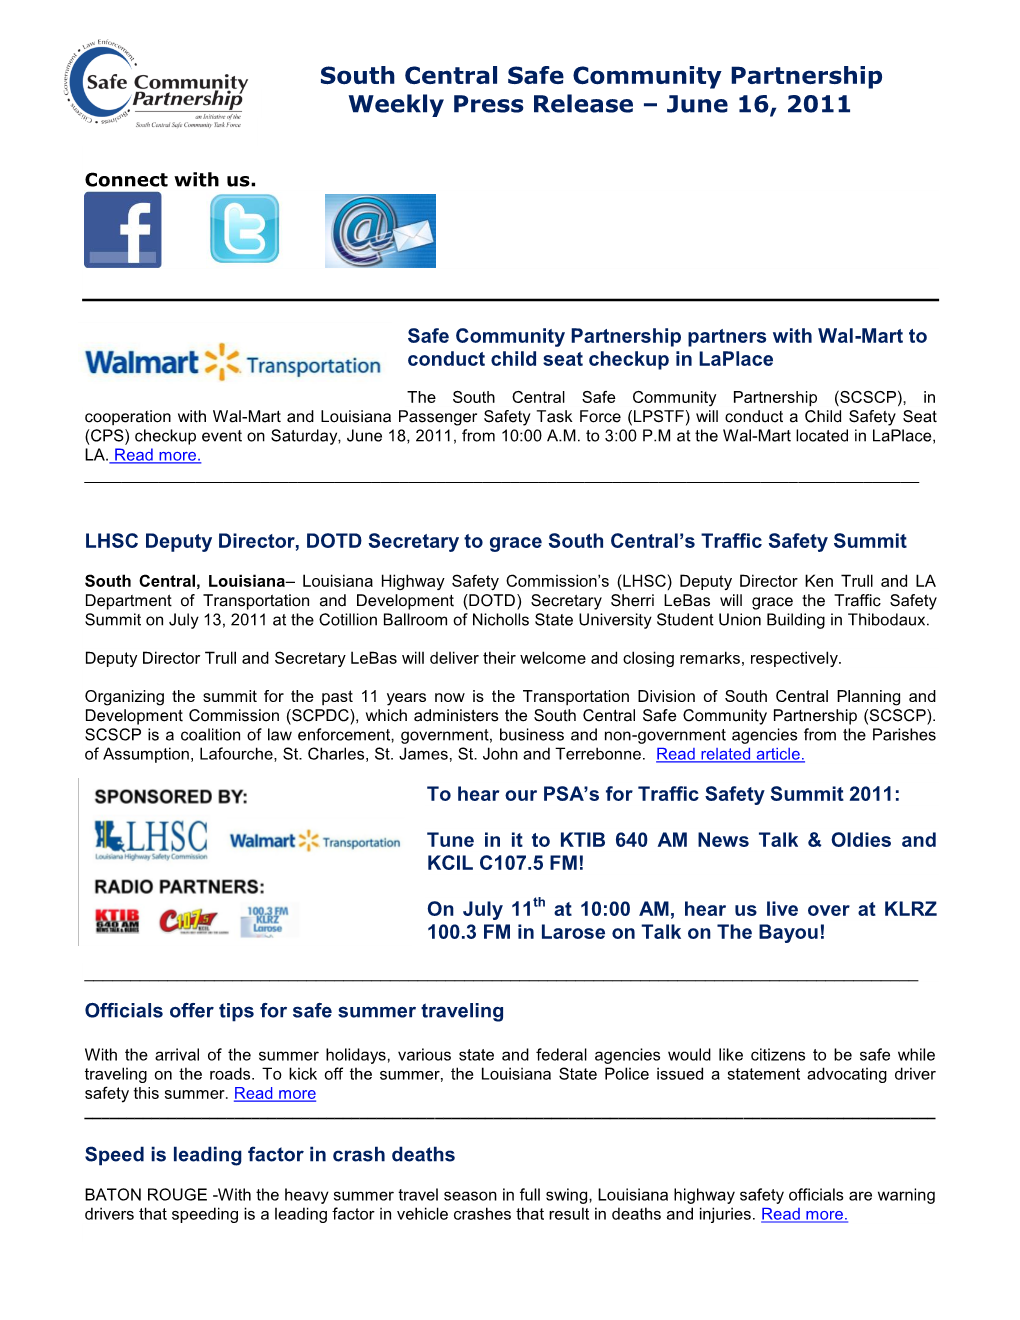 South Central Safe Community Partnership Weekly Press Release – June 16, 2011